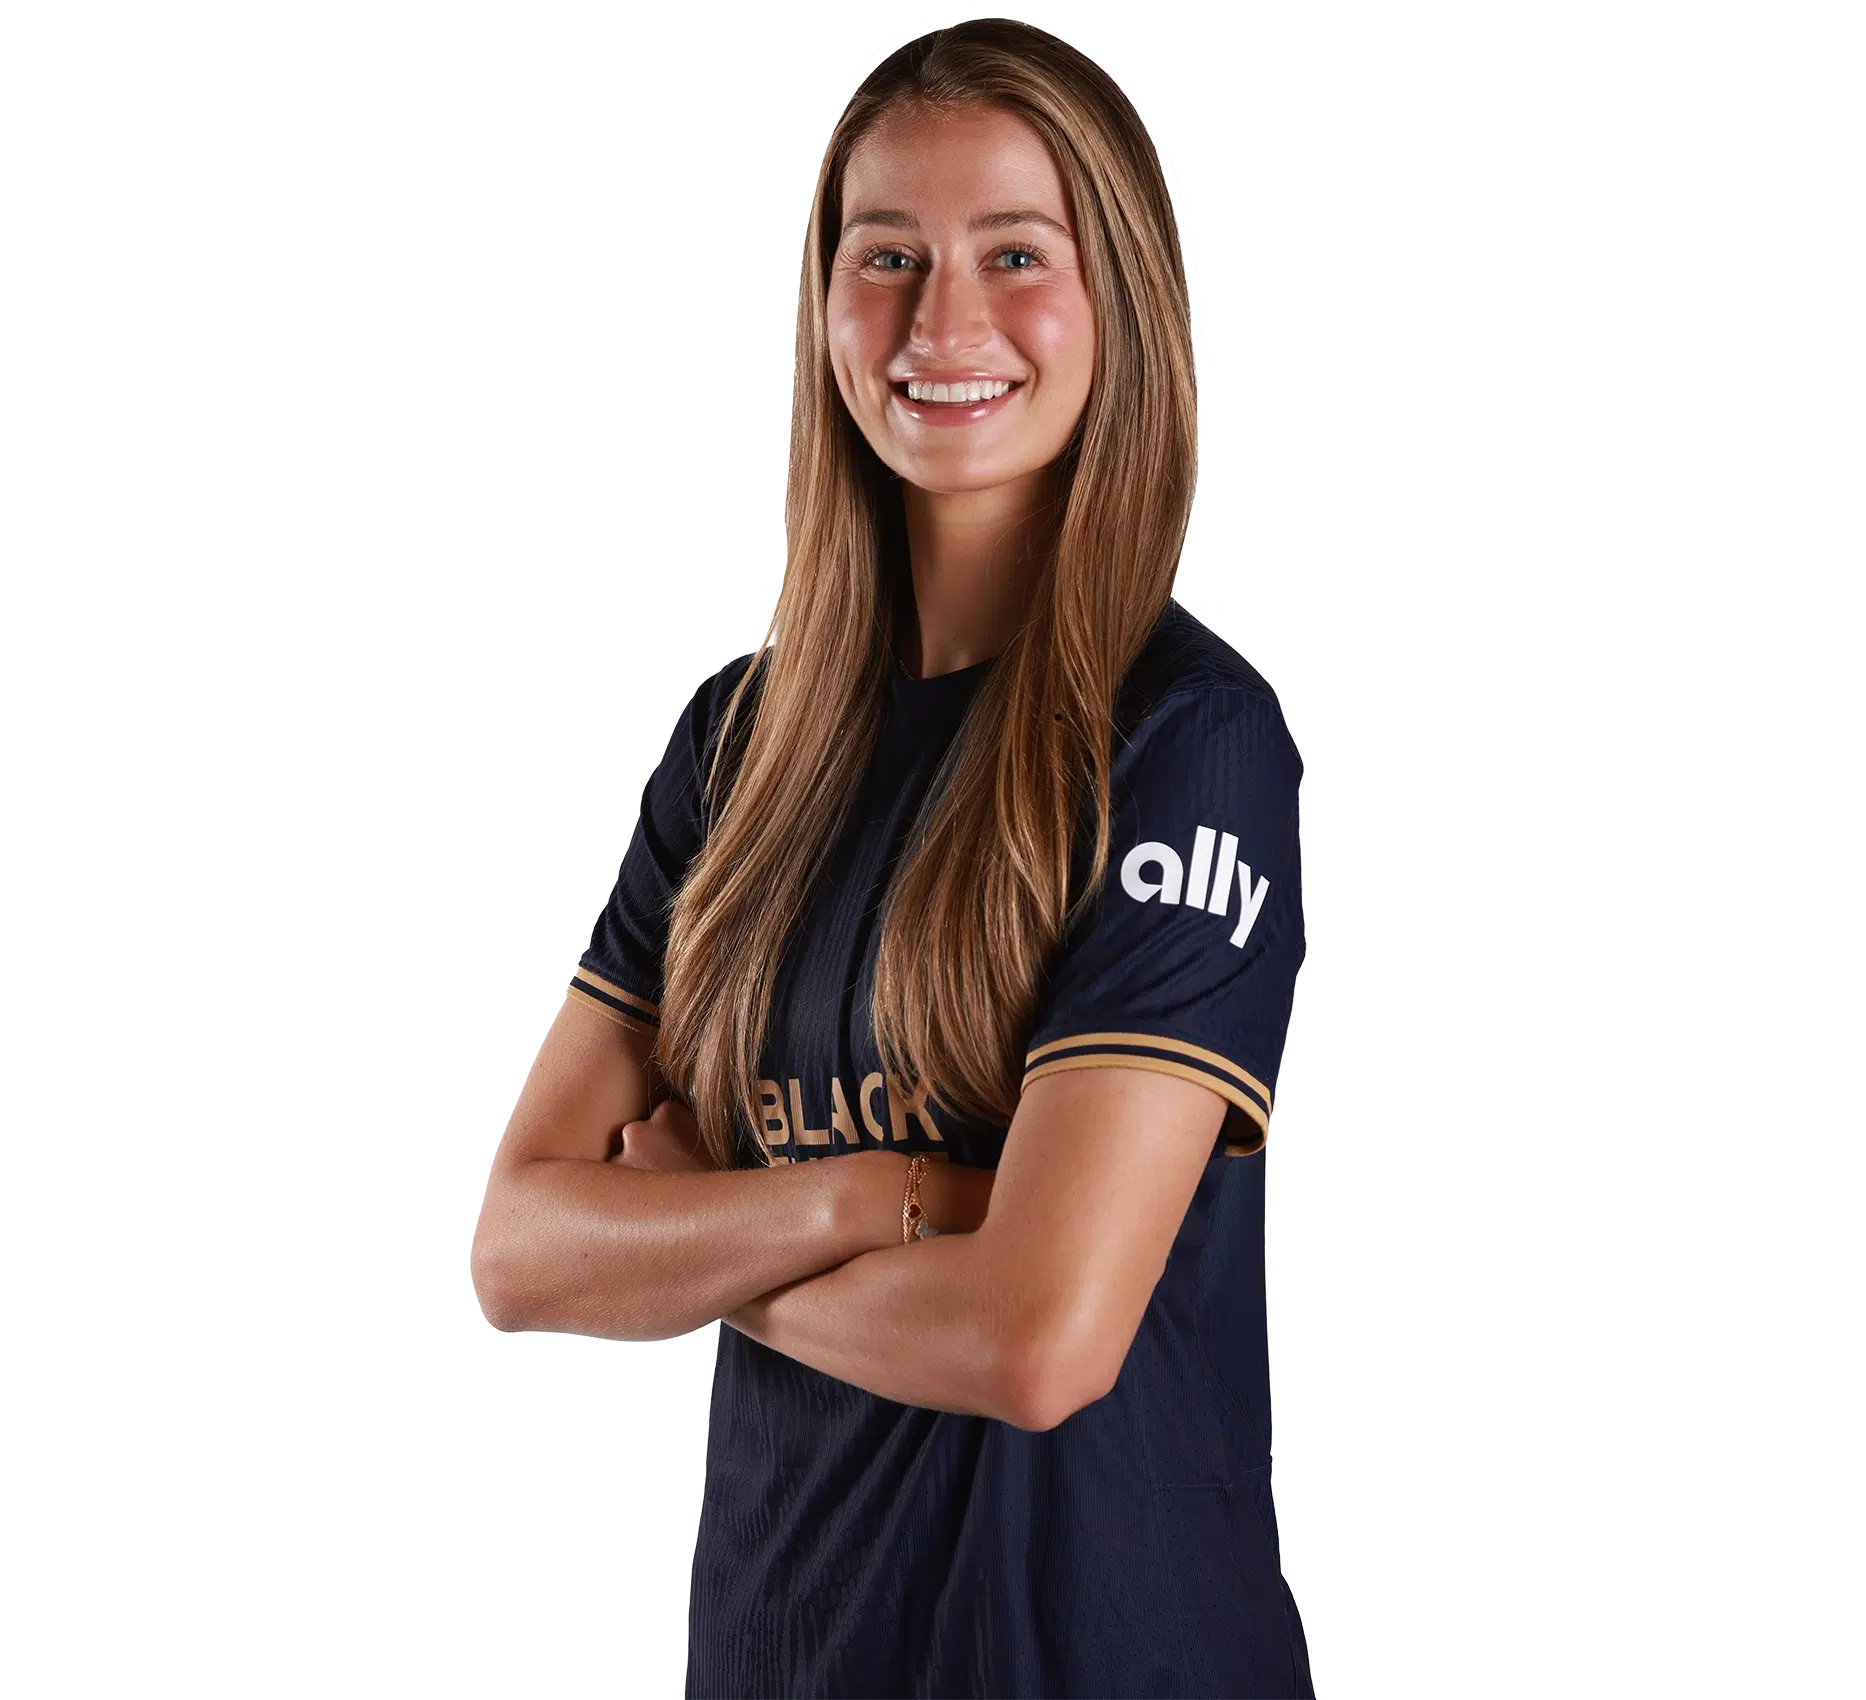 Seattle Reign featured player